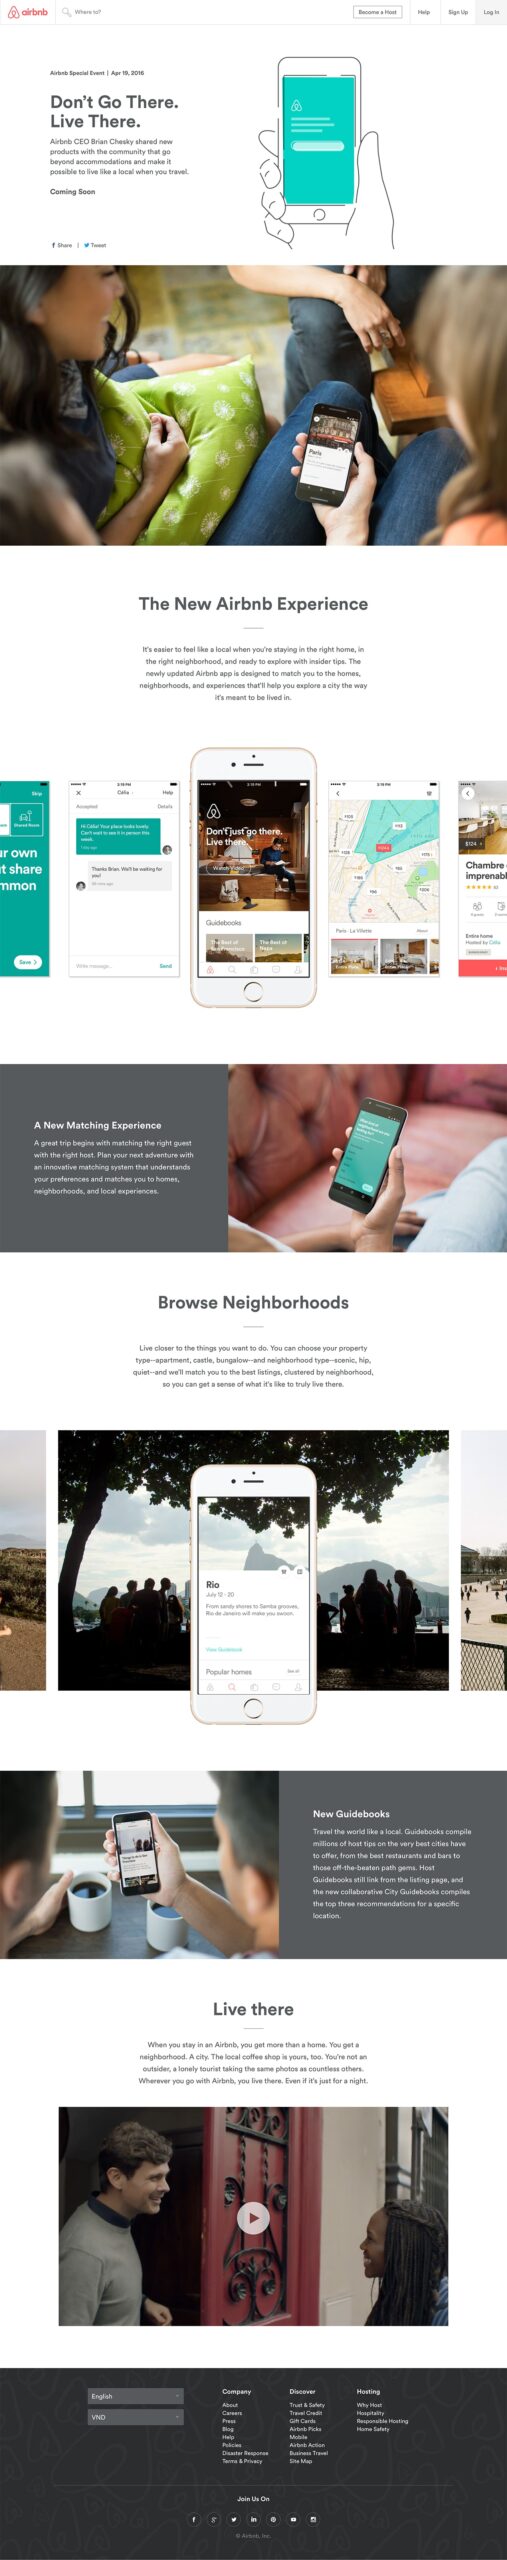 Airbnb Image For Landing Page Best Practices 